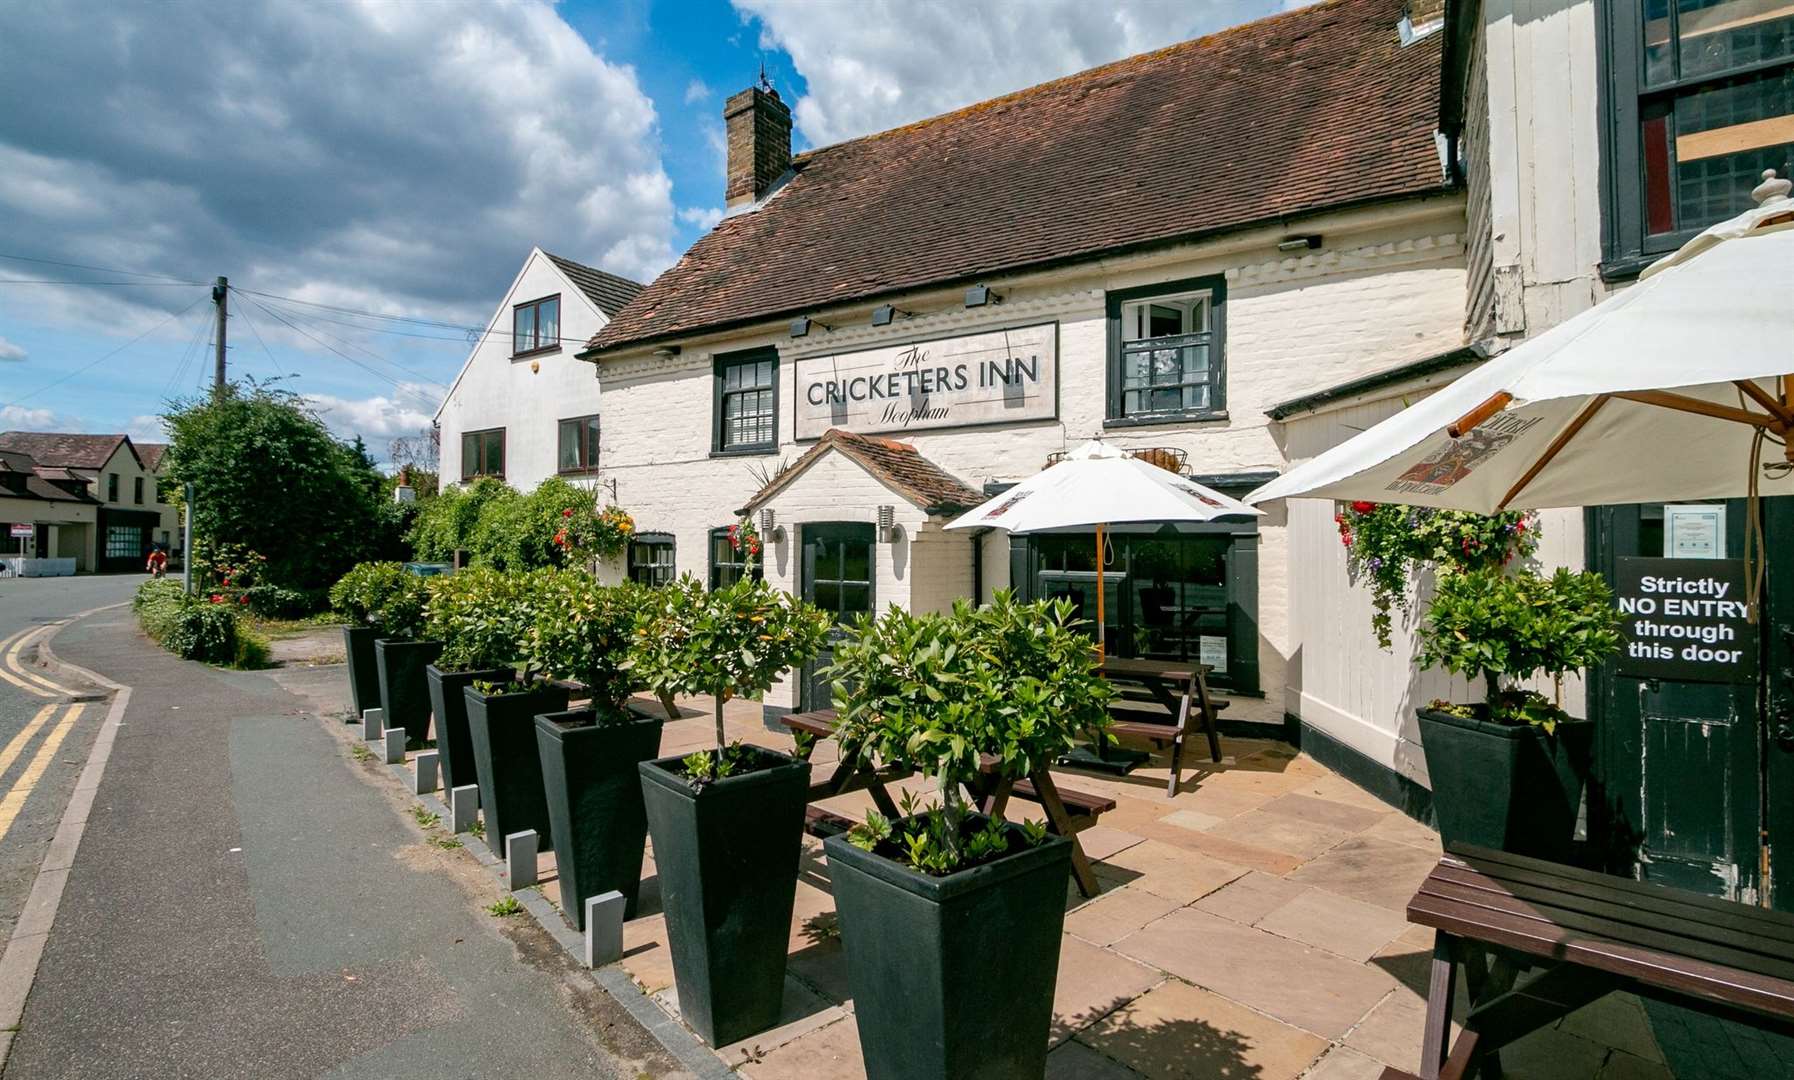 Take a seat across from the village green at The Cricketers in Meopham. Picture: iStock